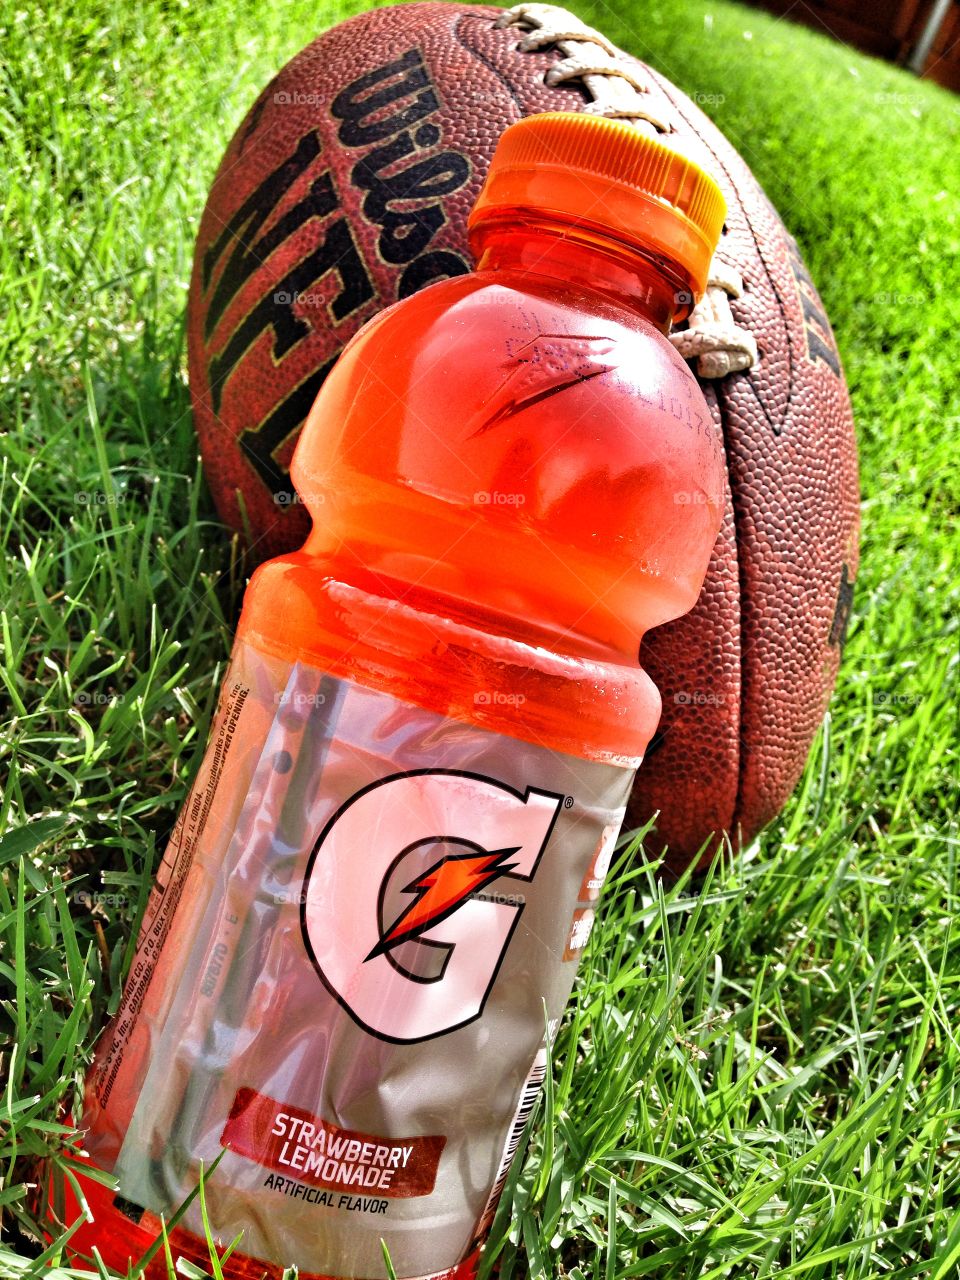 Time to hydrate. Gatorade and Wilson football
